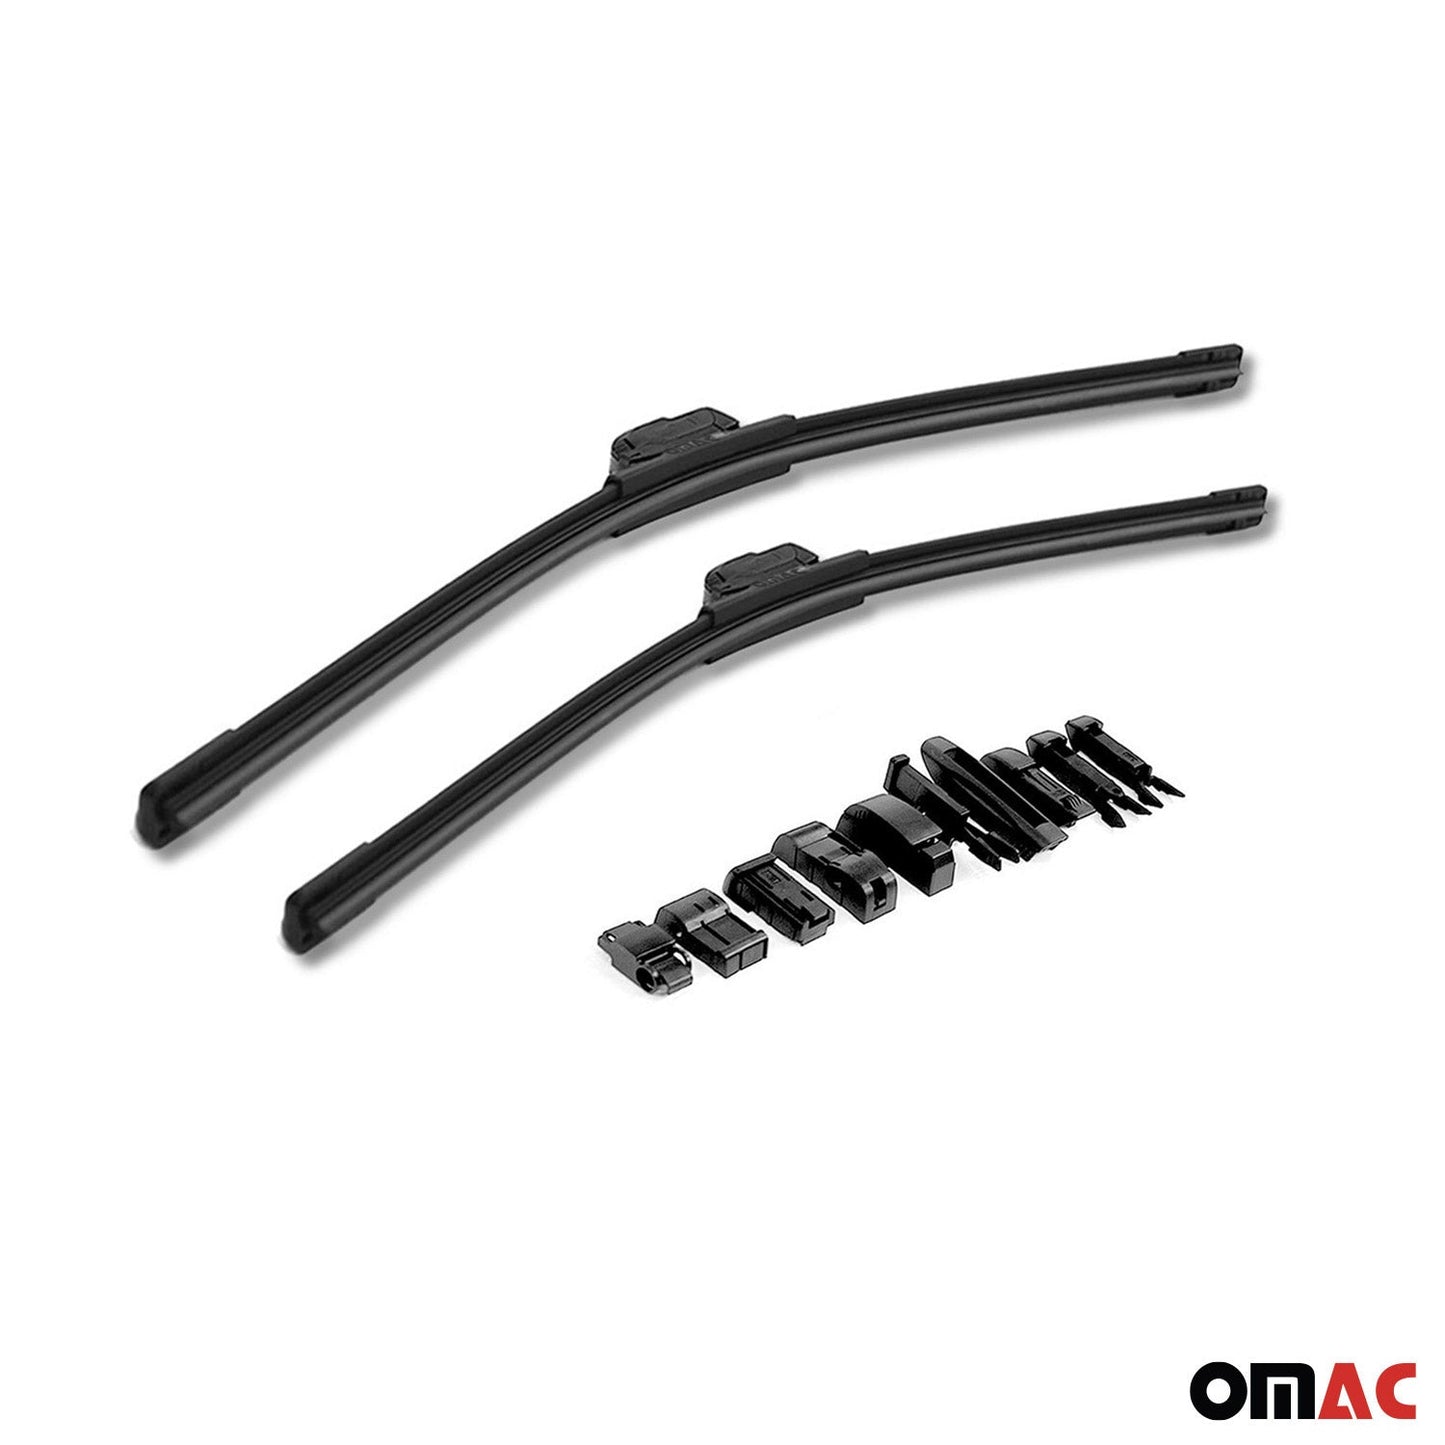 OMAC Front Windshield Wiper Blades Set for Jeep Patriot 2007-2017 A018865